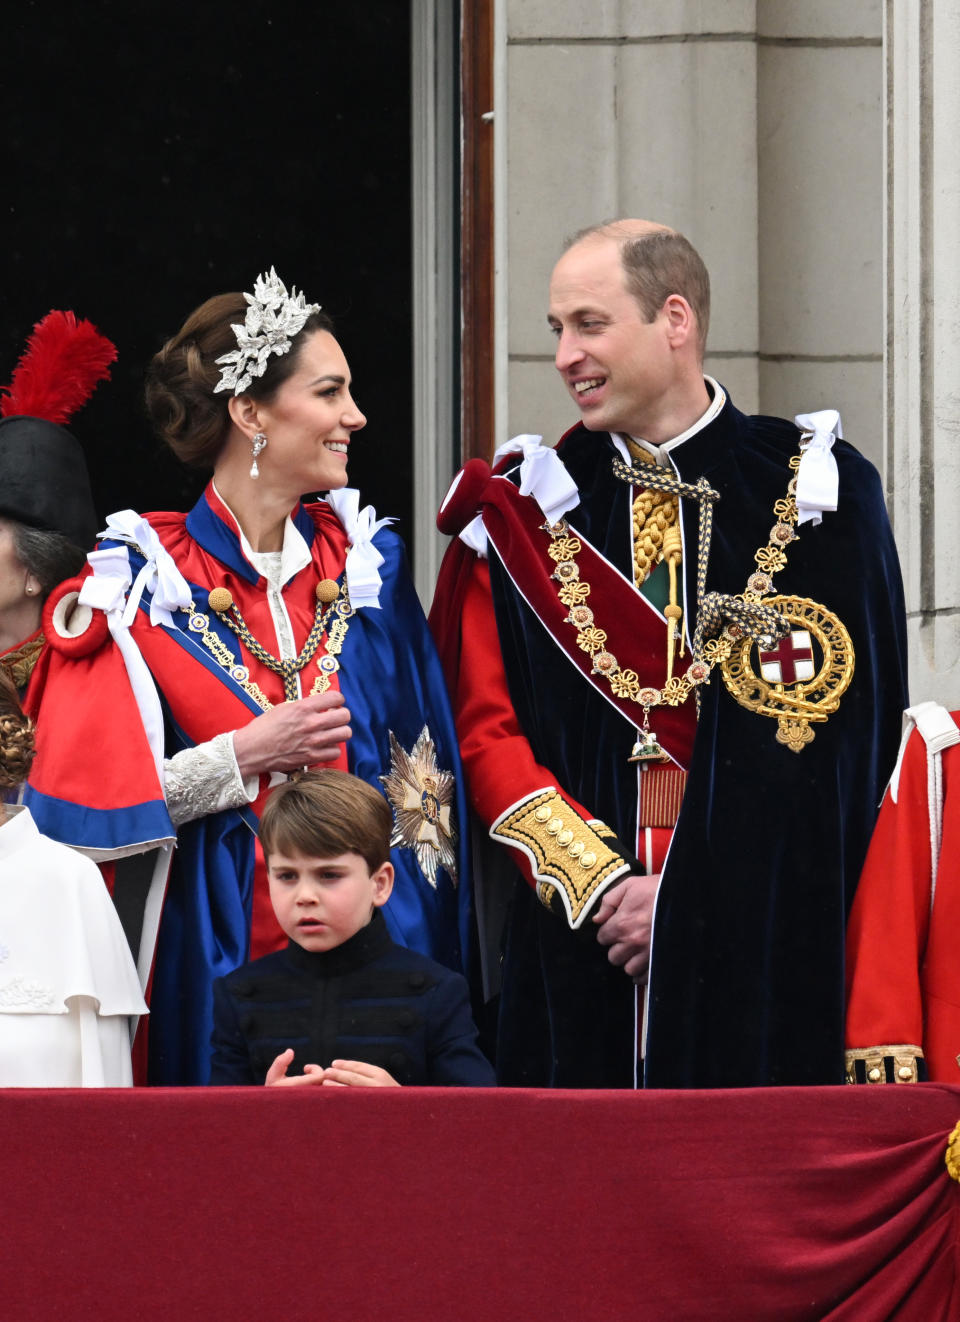 <p>LONDON, ENGLAND - MAY 06: (L-R) Prince Louis of Wales, Catherine, Princess of Wales and Prince William, Prince of Wales seen on the Buckingham Palace balcony during the Coronation of King Charles III and Queen Camilla on May 06, 2023 in London, England. The Coronation of Charles III and his wife, Camilla, as King and Queen of the United Kingdom of Great Britain and Northern Ireland, and the other Commonwealth realms takes place at Westminster Abbey today. Charles acceded to the throne on 8 September 2022, upon the death of his mother, Elizabeth II. (Photo by Samir Hussein/WireImage)</p> 